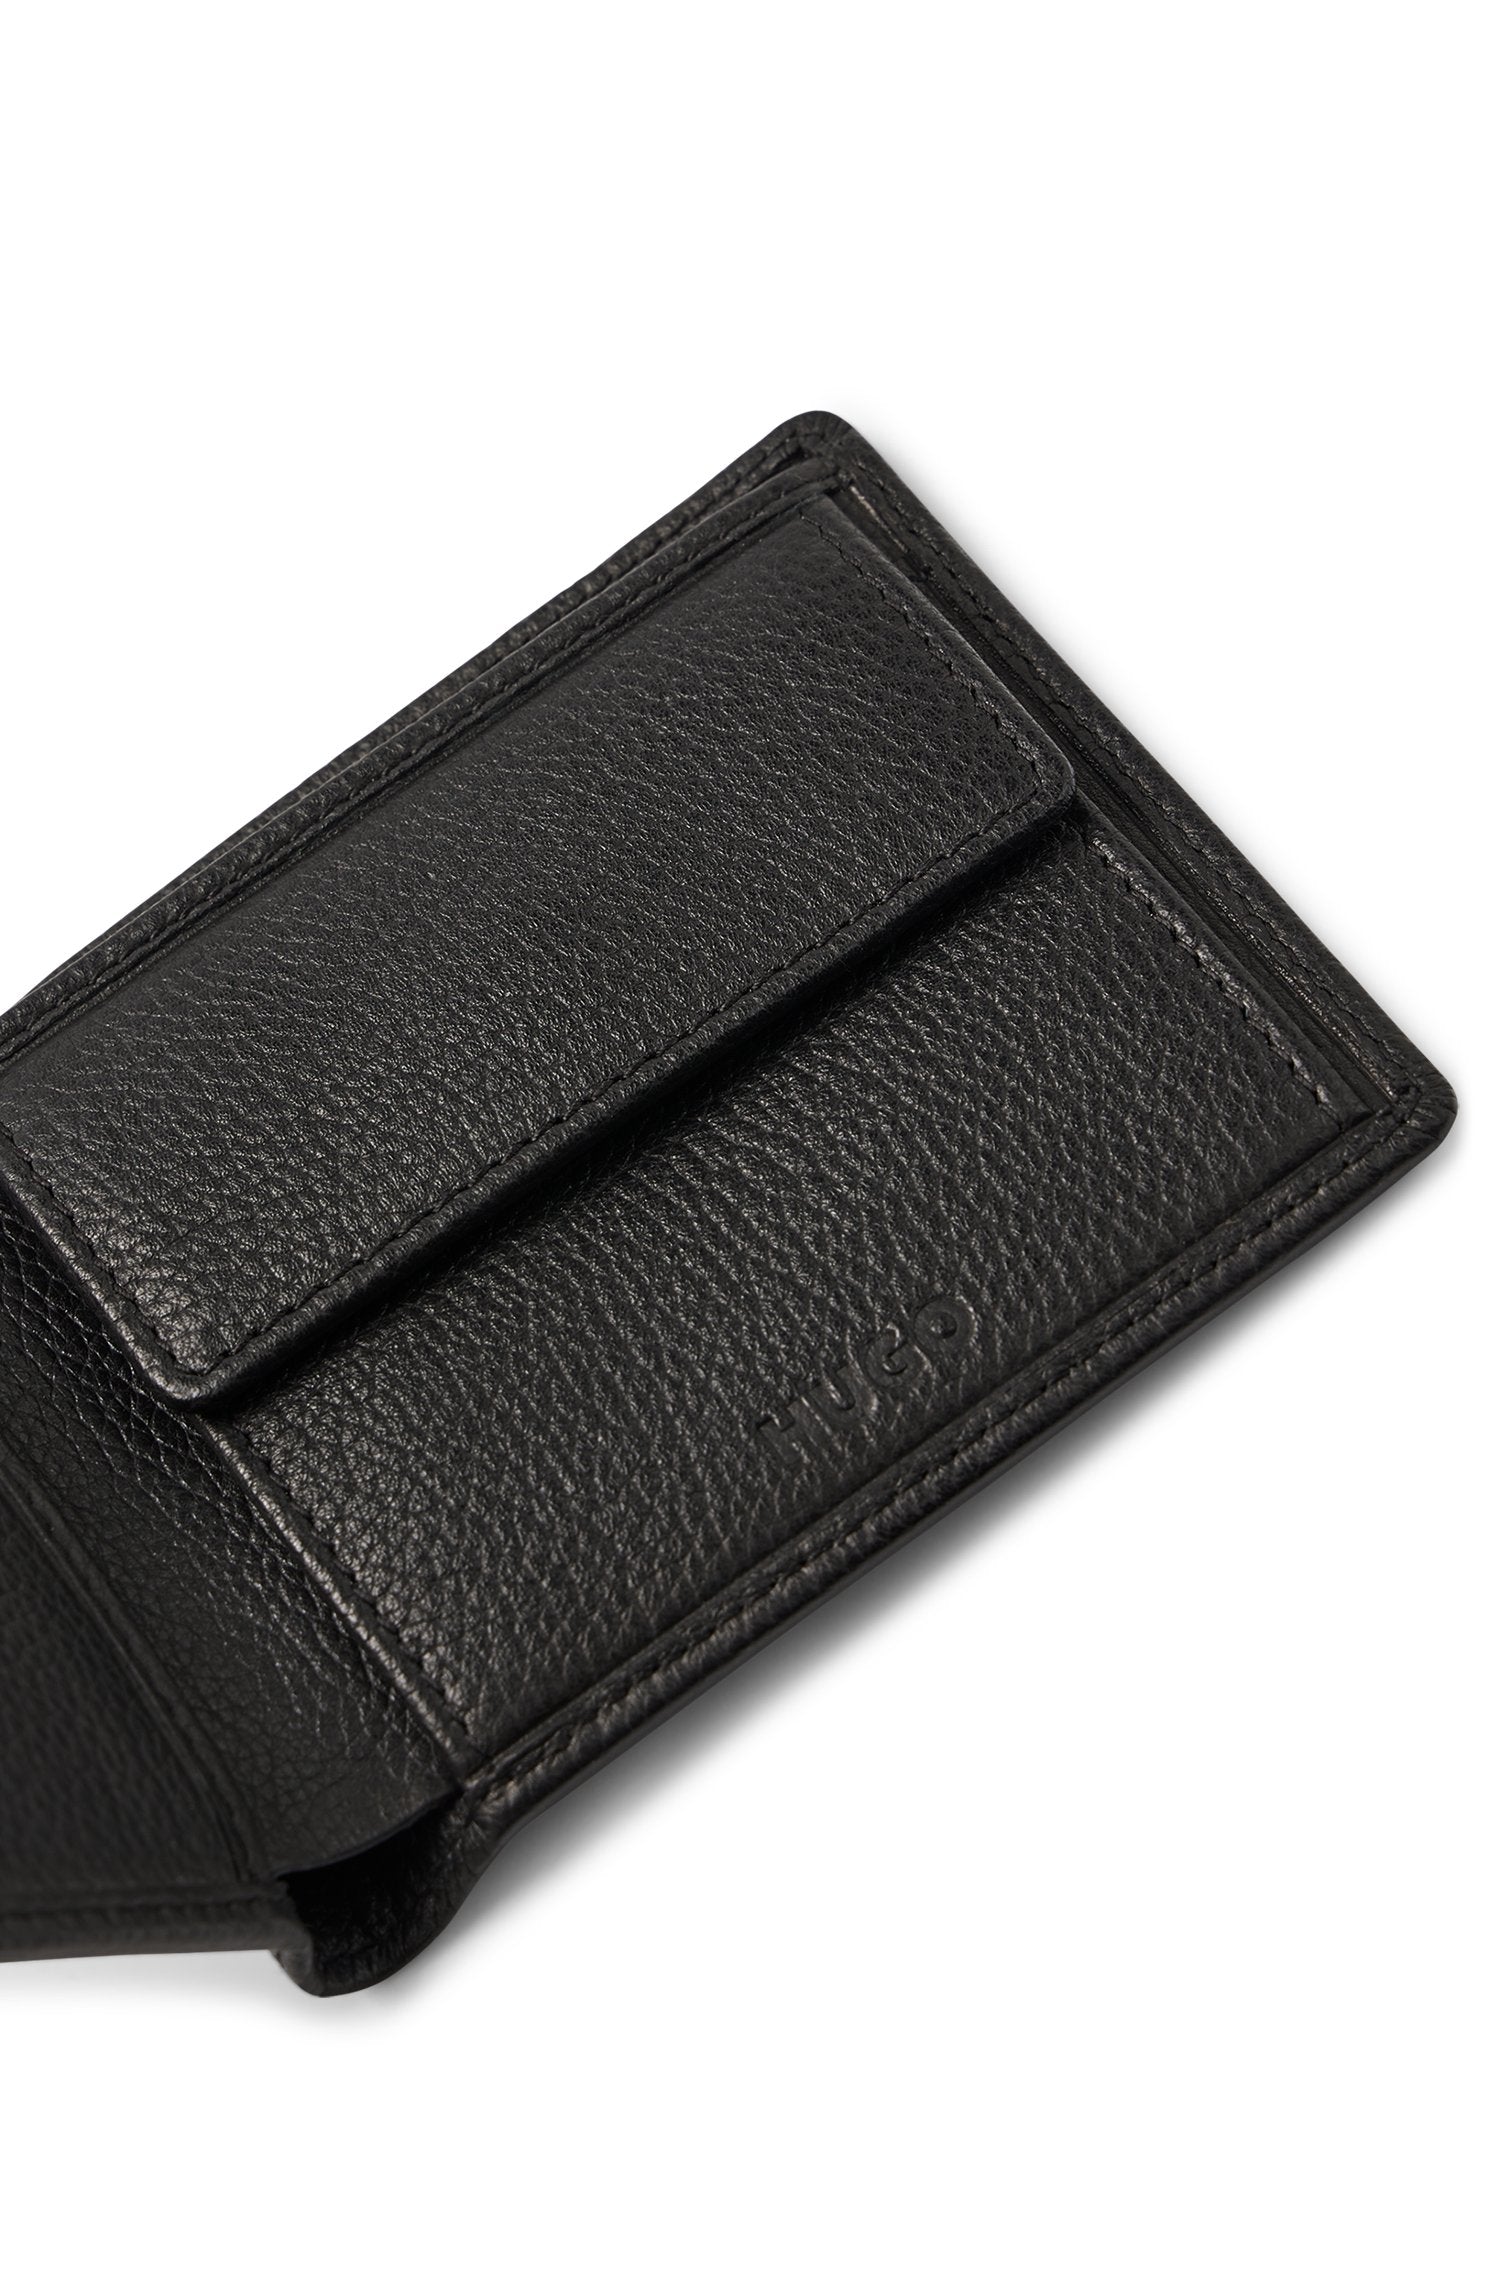 HUGO Shoes & Accessories Subway GRN_4 cc coin Wallet 001 Black